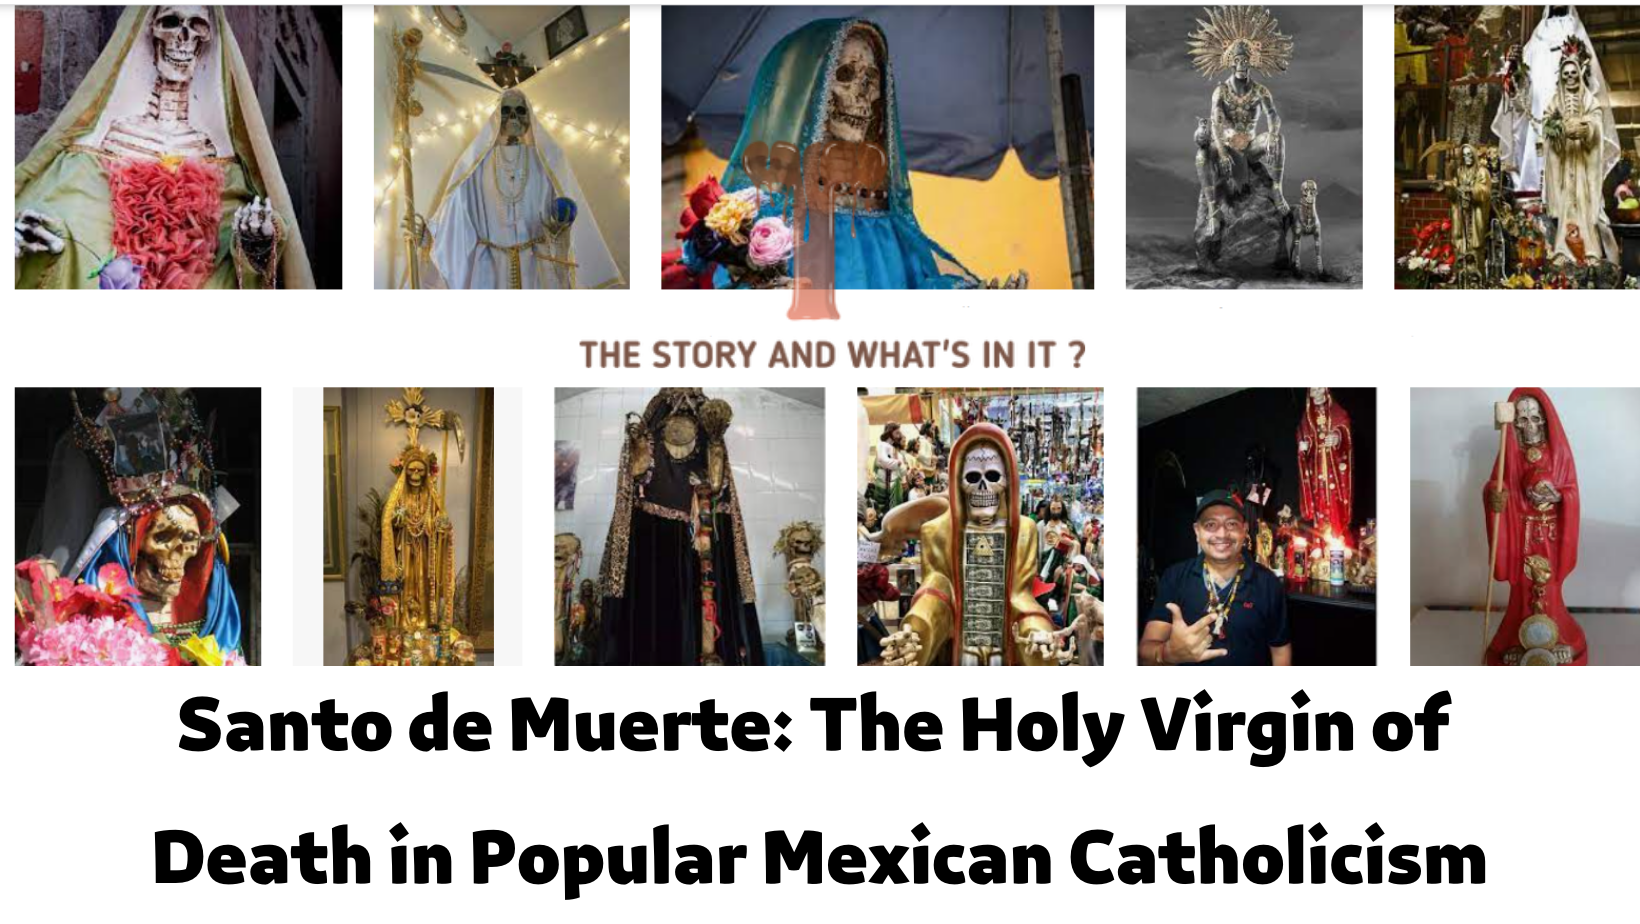 Santo de Muerte The Holy Virgin of Death in Popular Mexican Catholicism